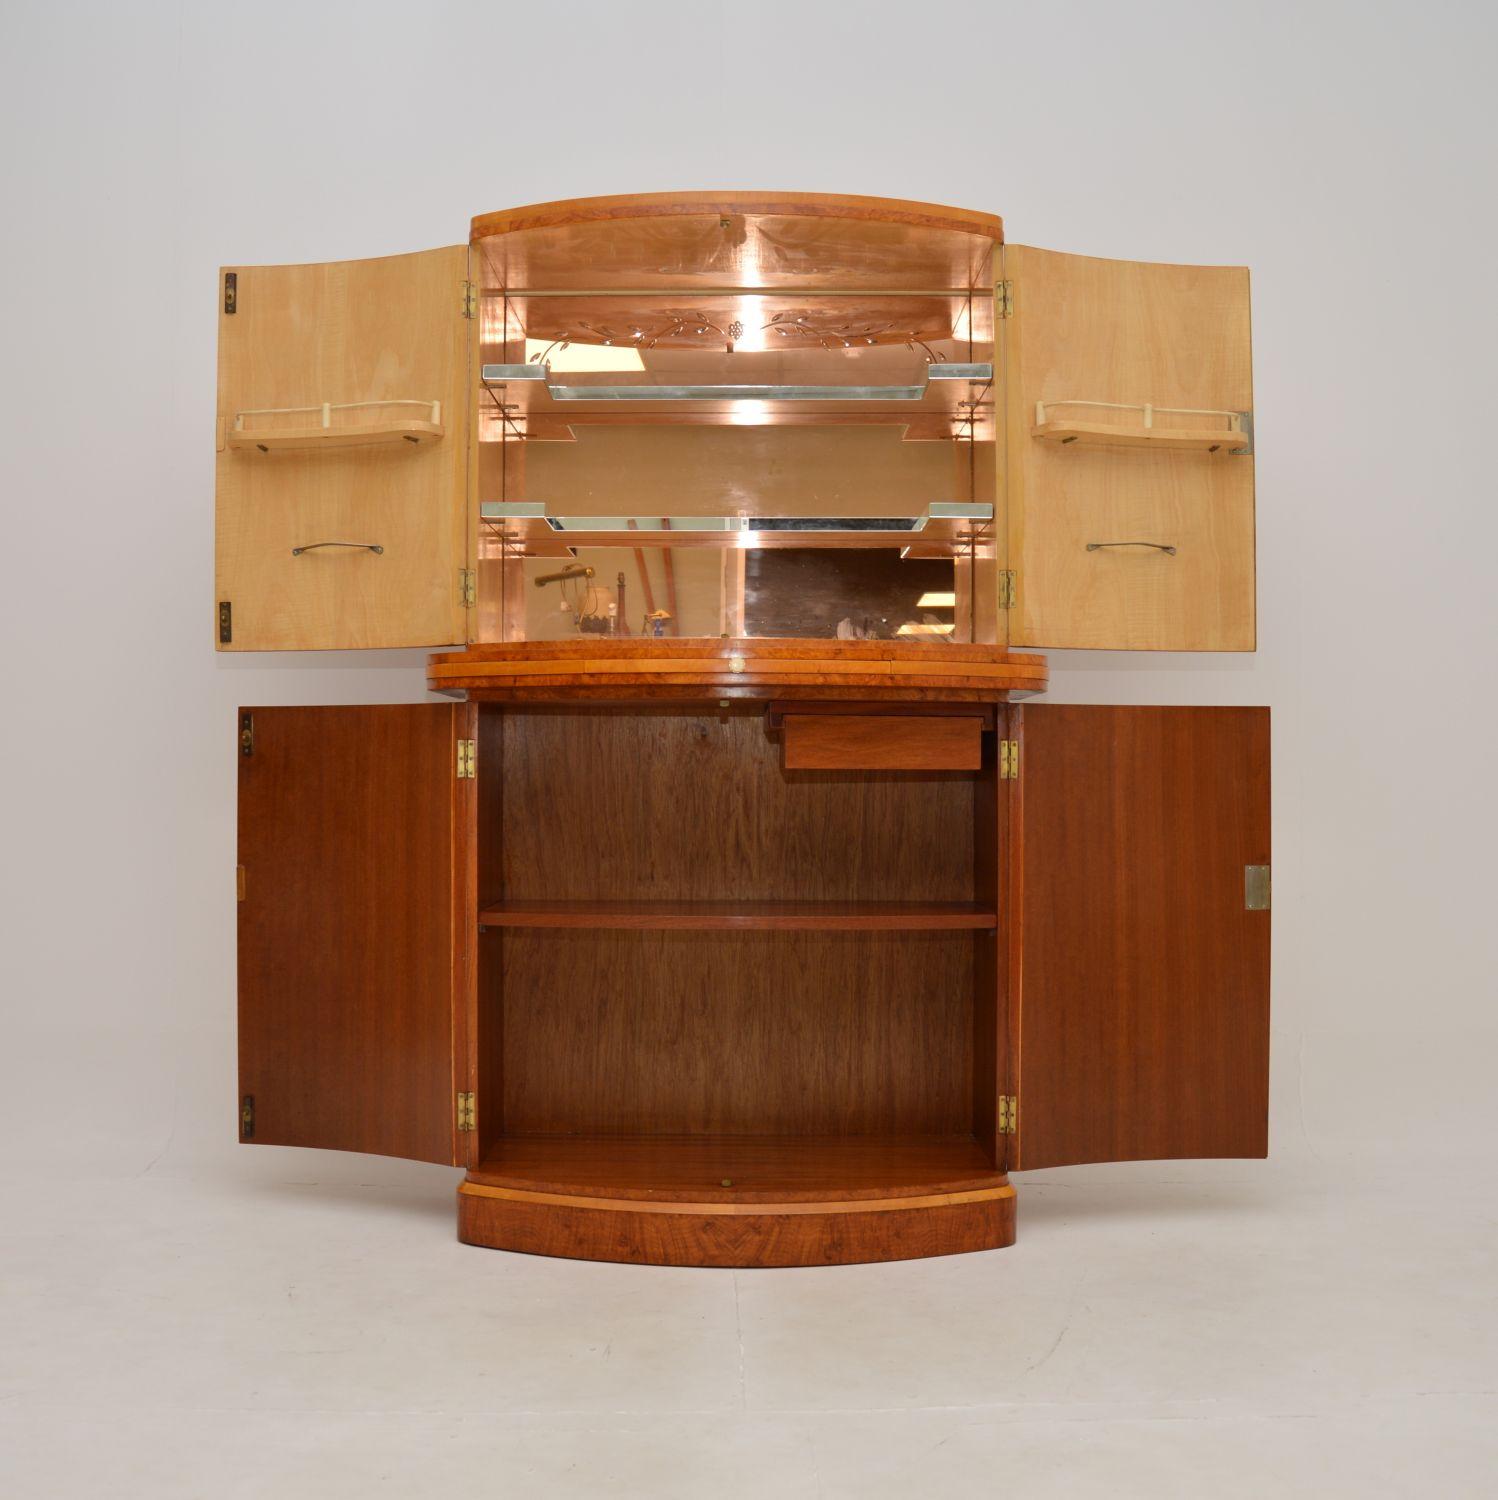 An absolutely magnificent Art Deco burr walnut cocktail cabinet by Epstein. This was made in England, it dates from the 1920-30’s.

It is of the utmost quality, this is one of the finest examples of an Art Deco drinks cabinet you could possibly